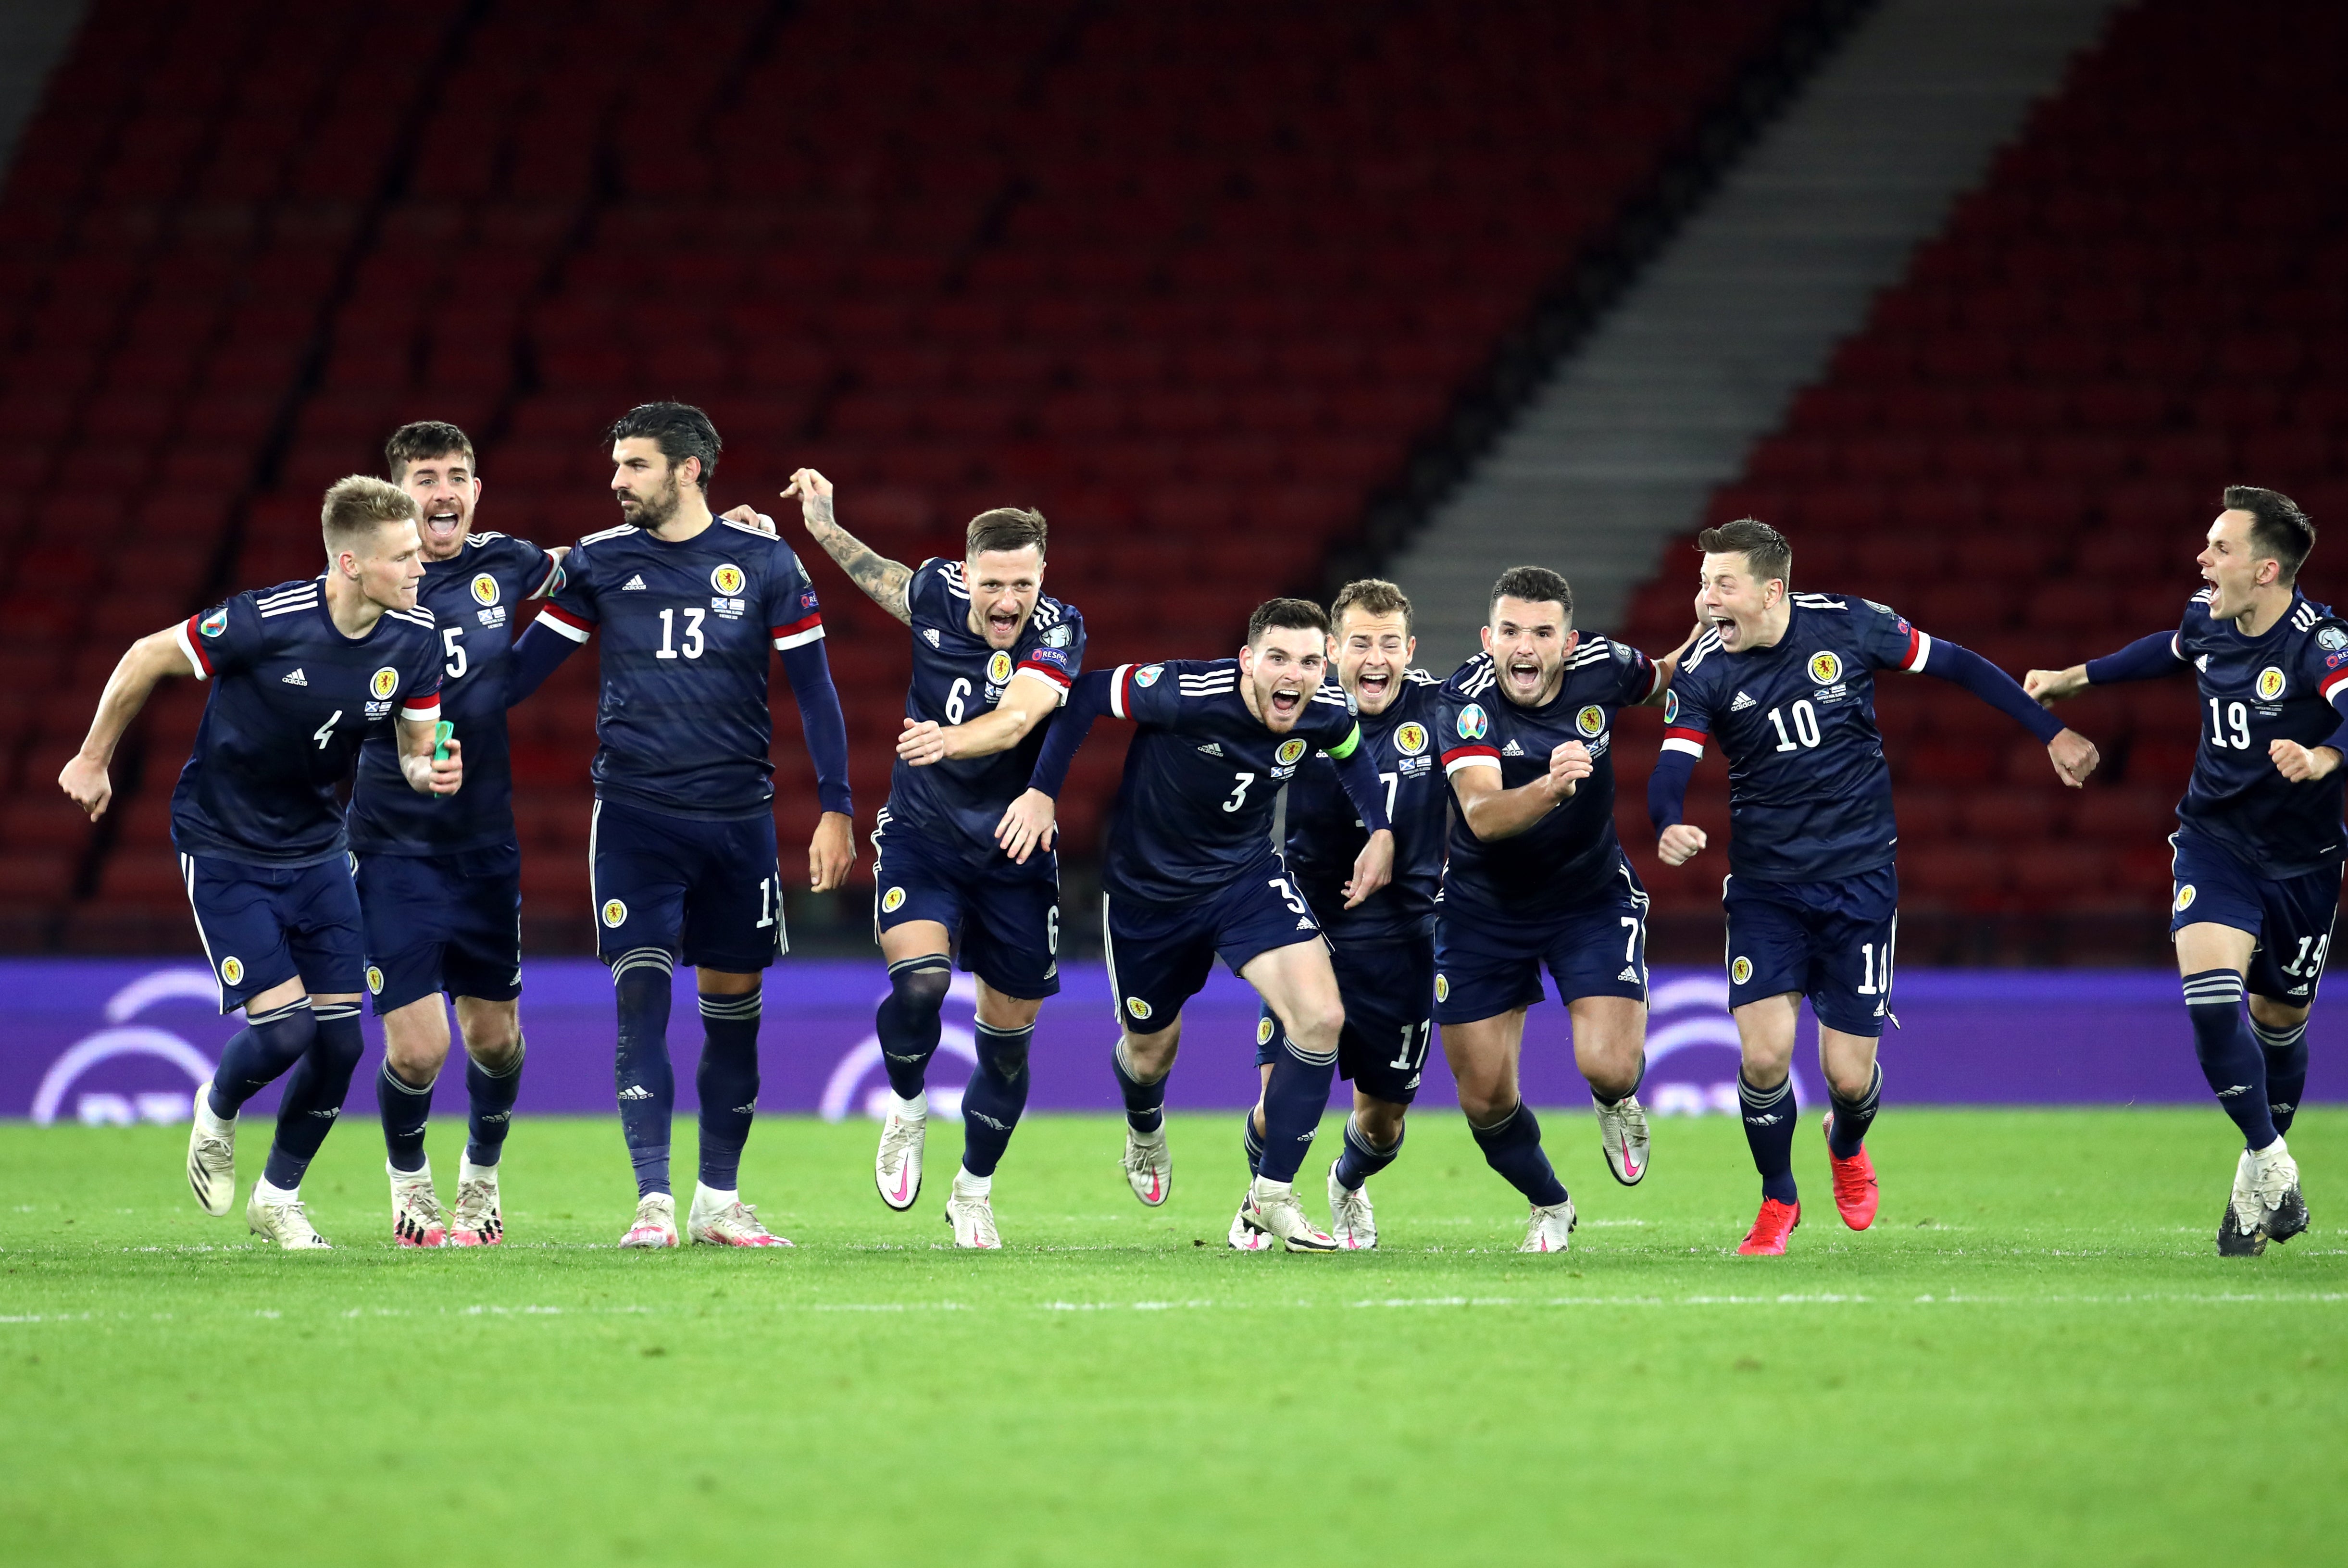 Scotland will play in a major tournament for the first time since the 1998 World Cup